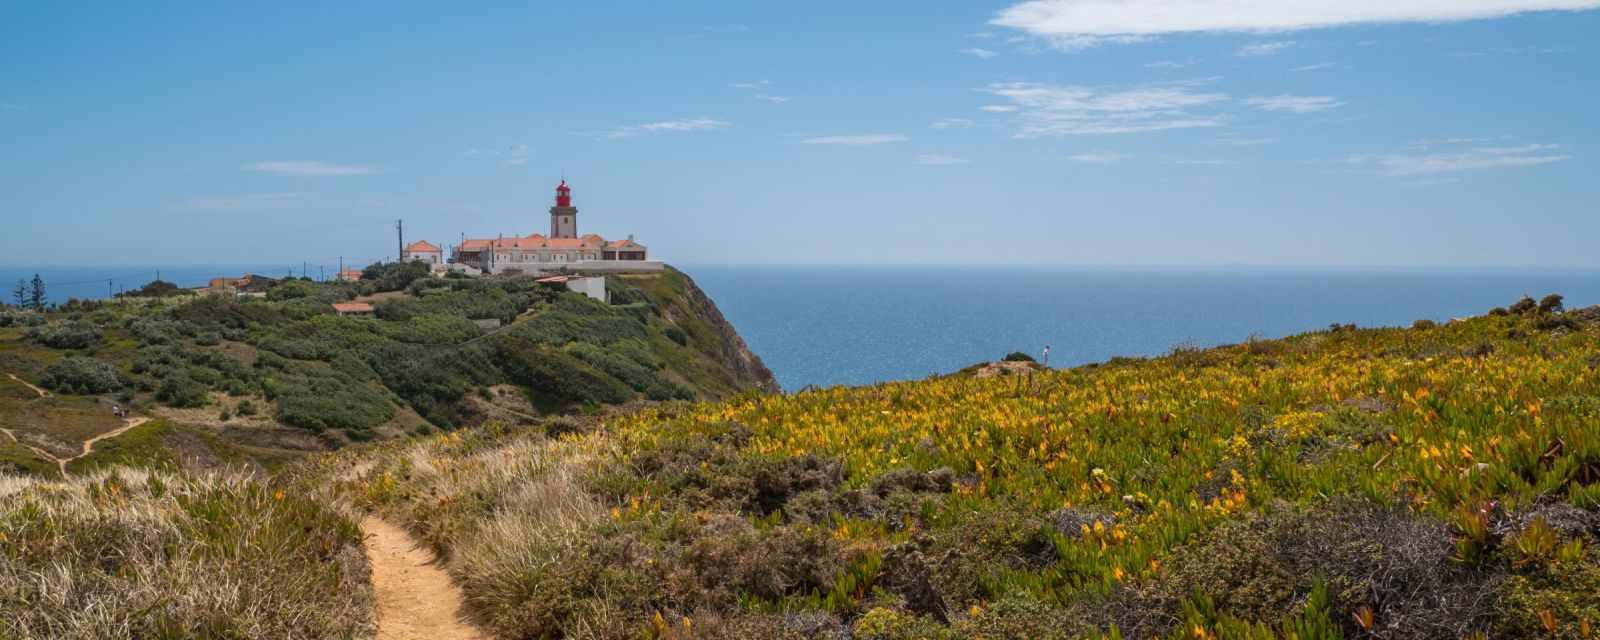 Cabo Da Roca and the Lighthouse in Portugal - Sunset Tips and Season Guide